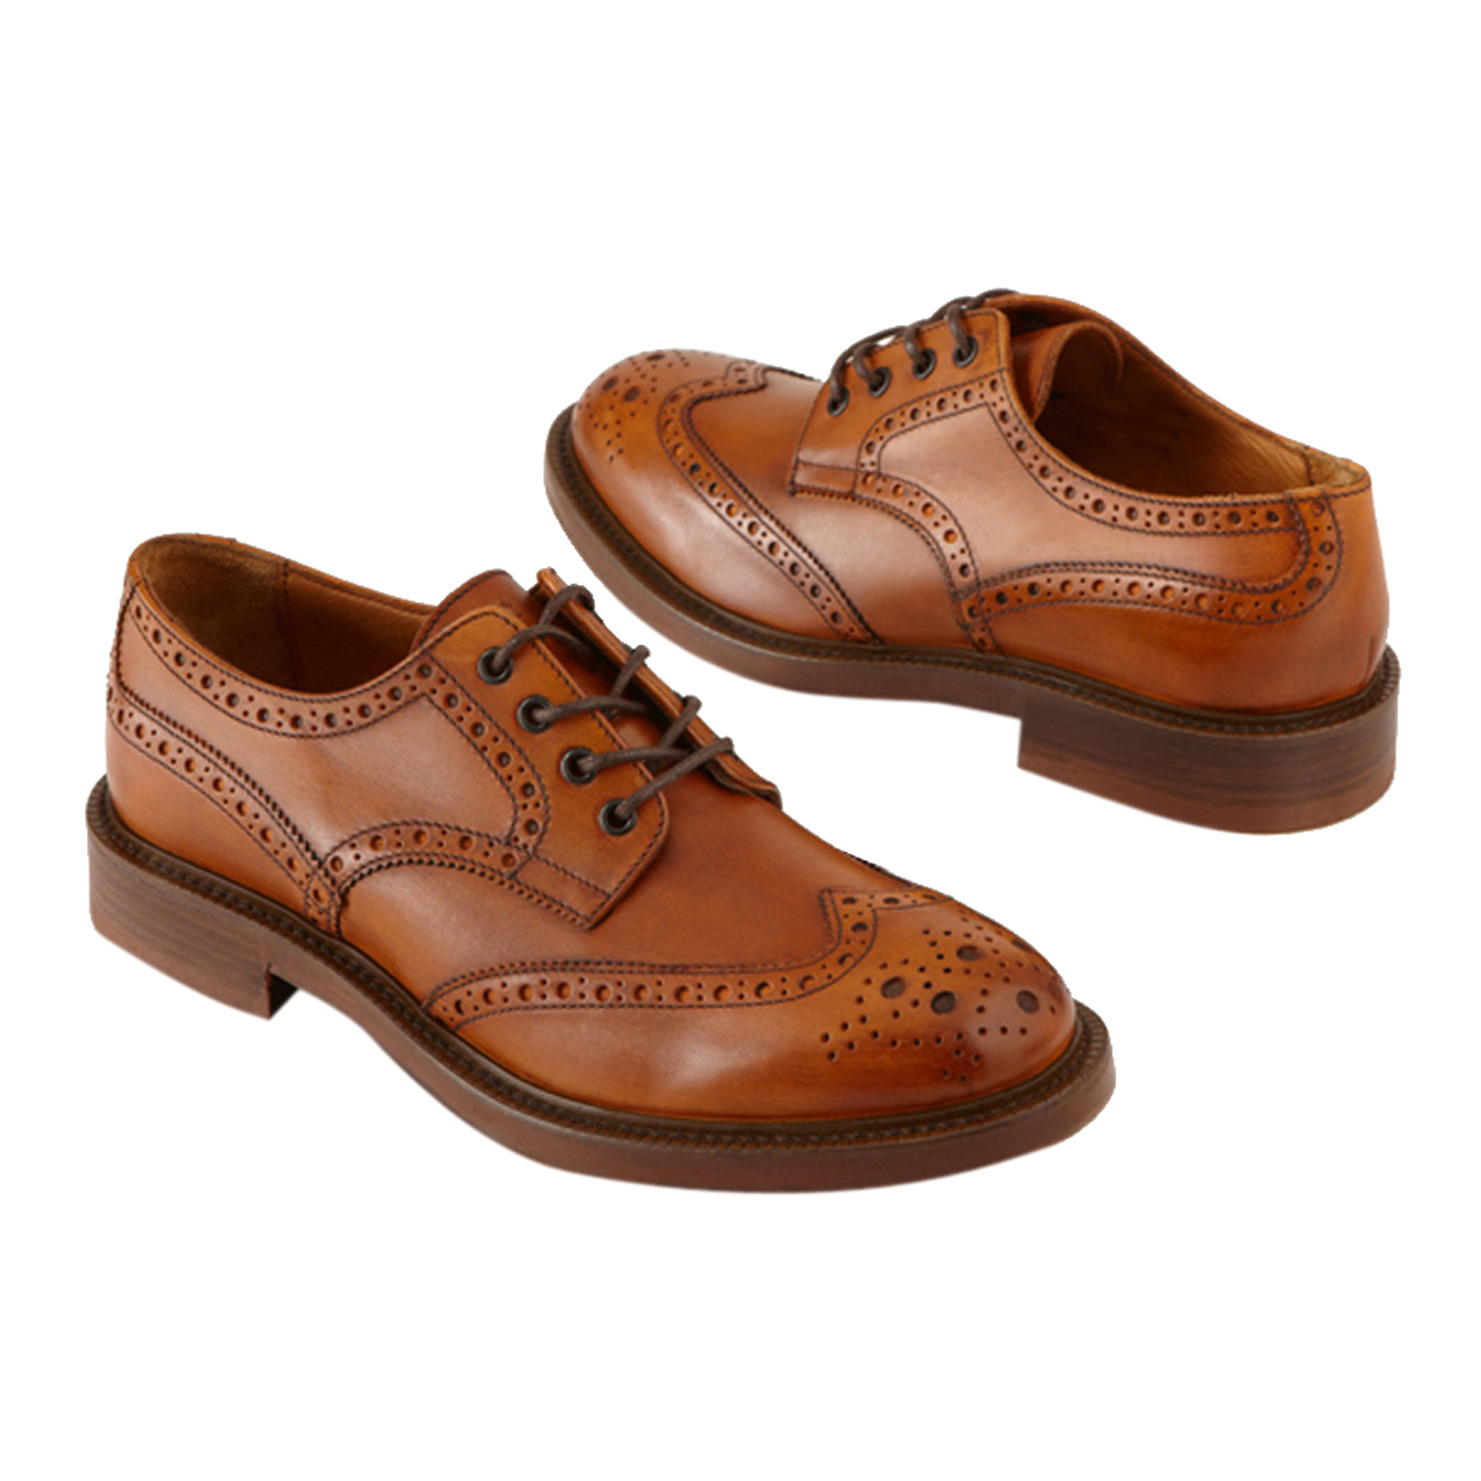 Mr. B's Adamis Men Shoes : All About Shoes & Accessories